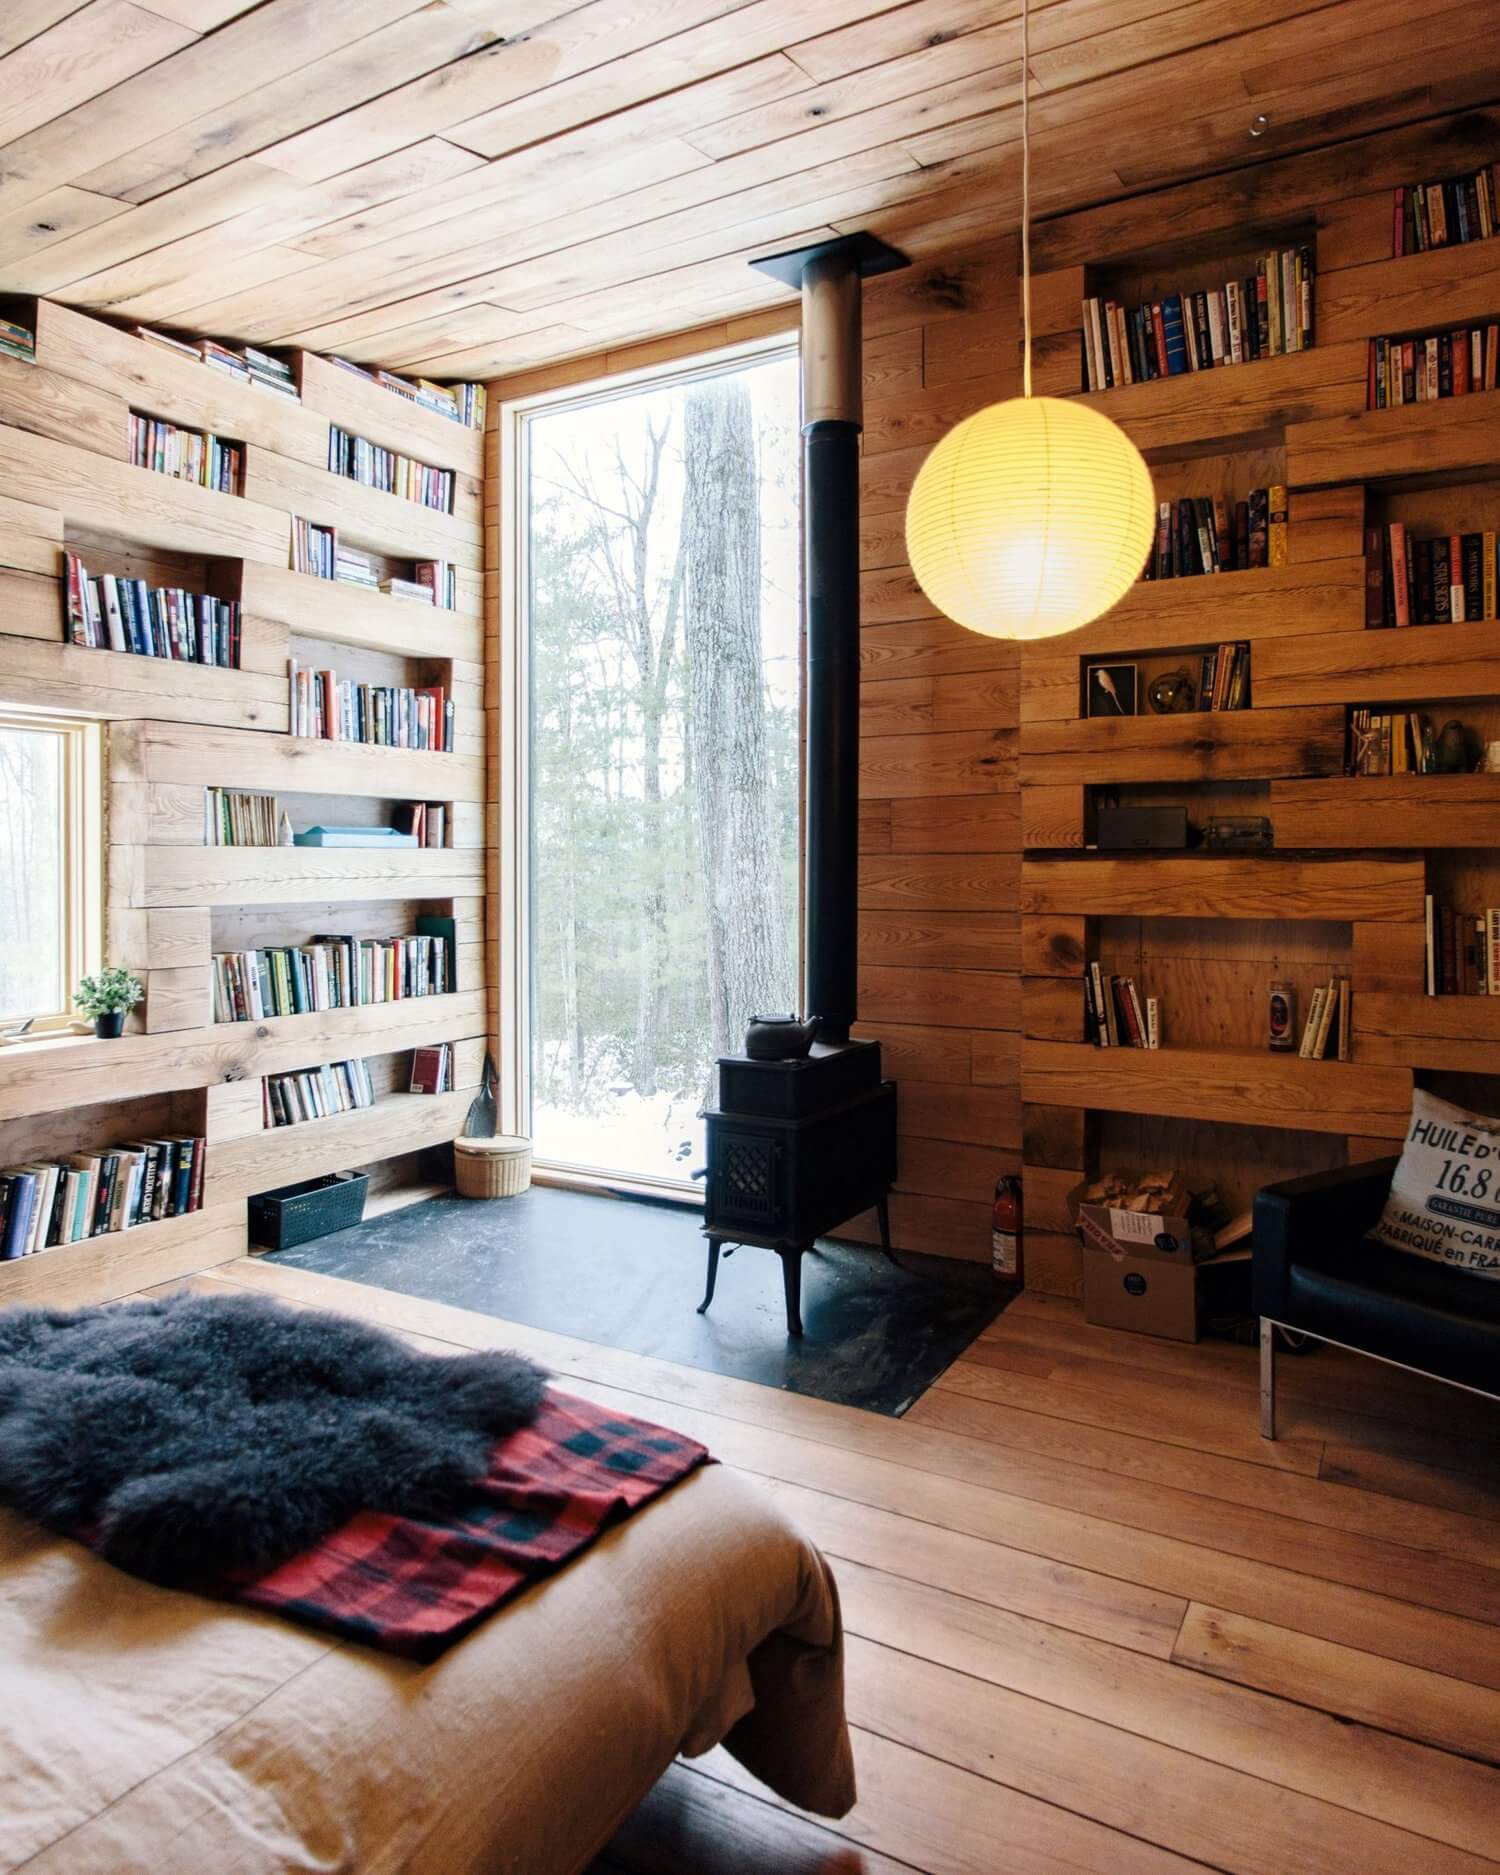 cabin fever nordroom9 Cabin Fever: 10 Cozy Cabins for Escaping The World